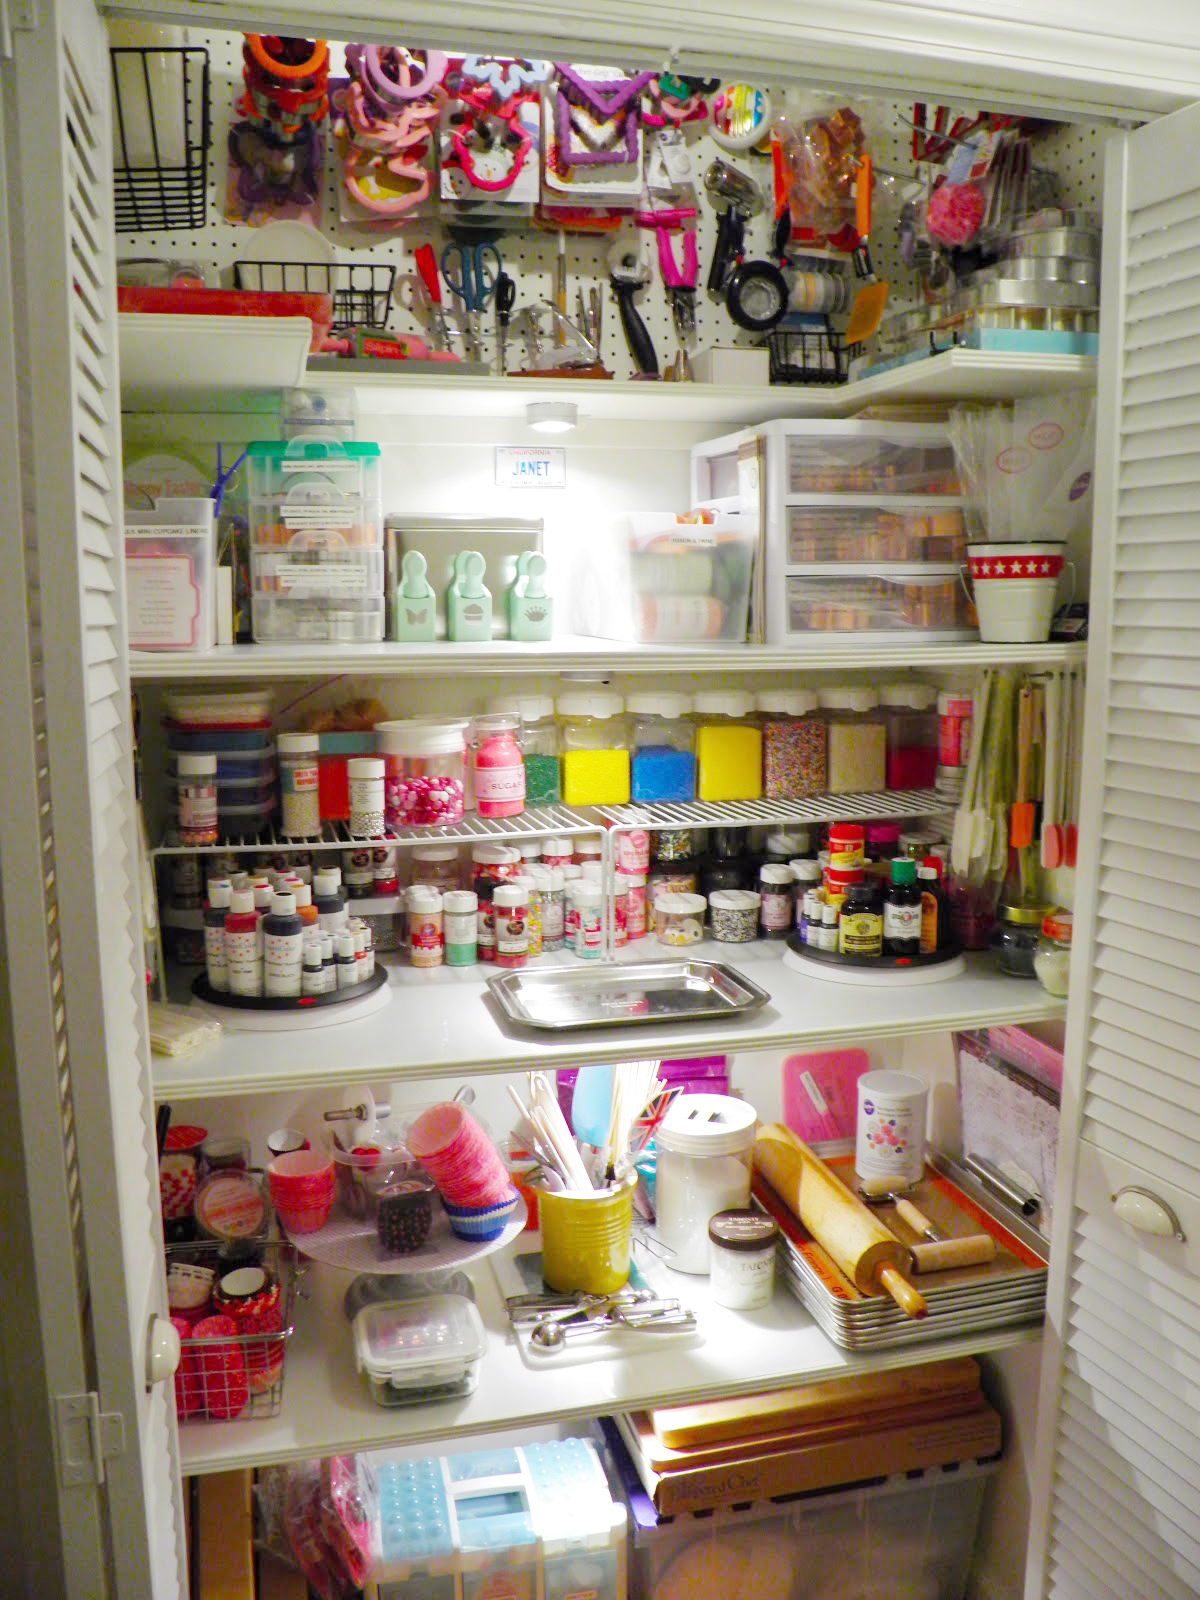 Let me show you how I organized my baking center.